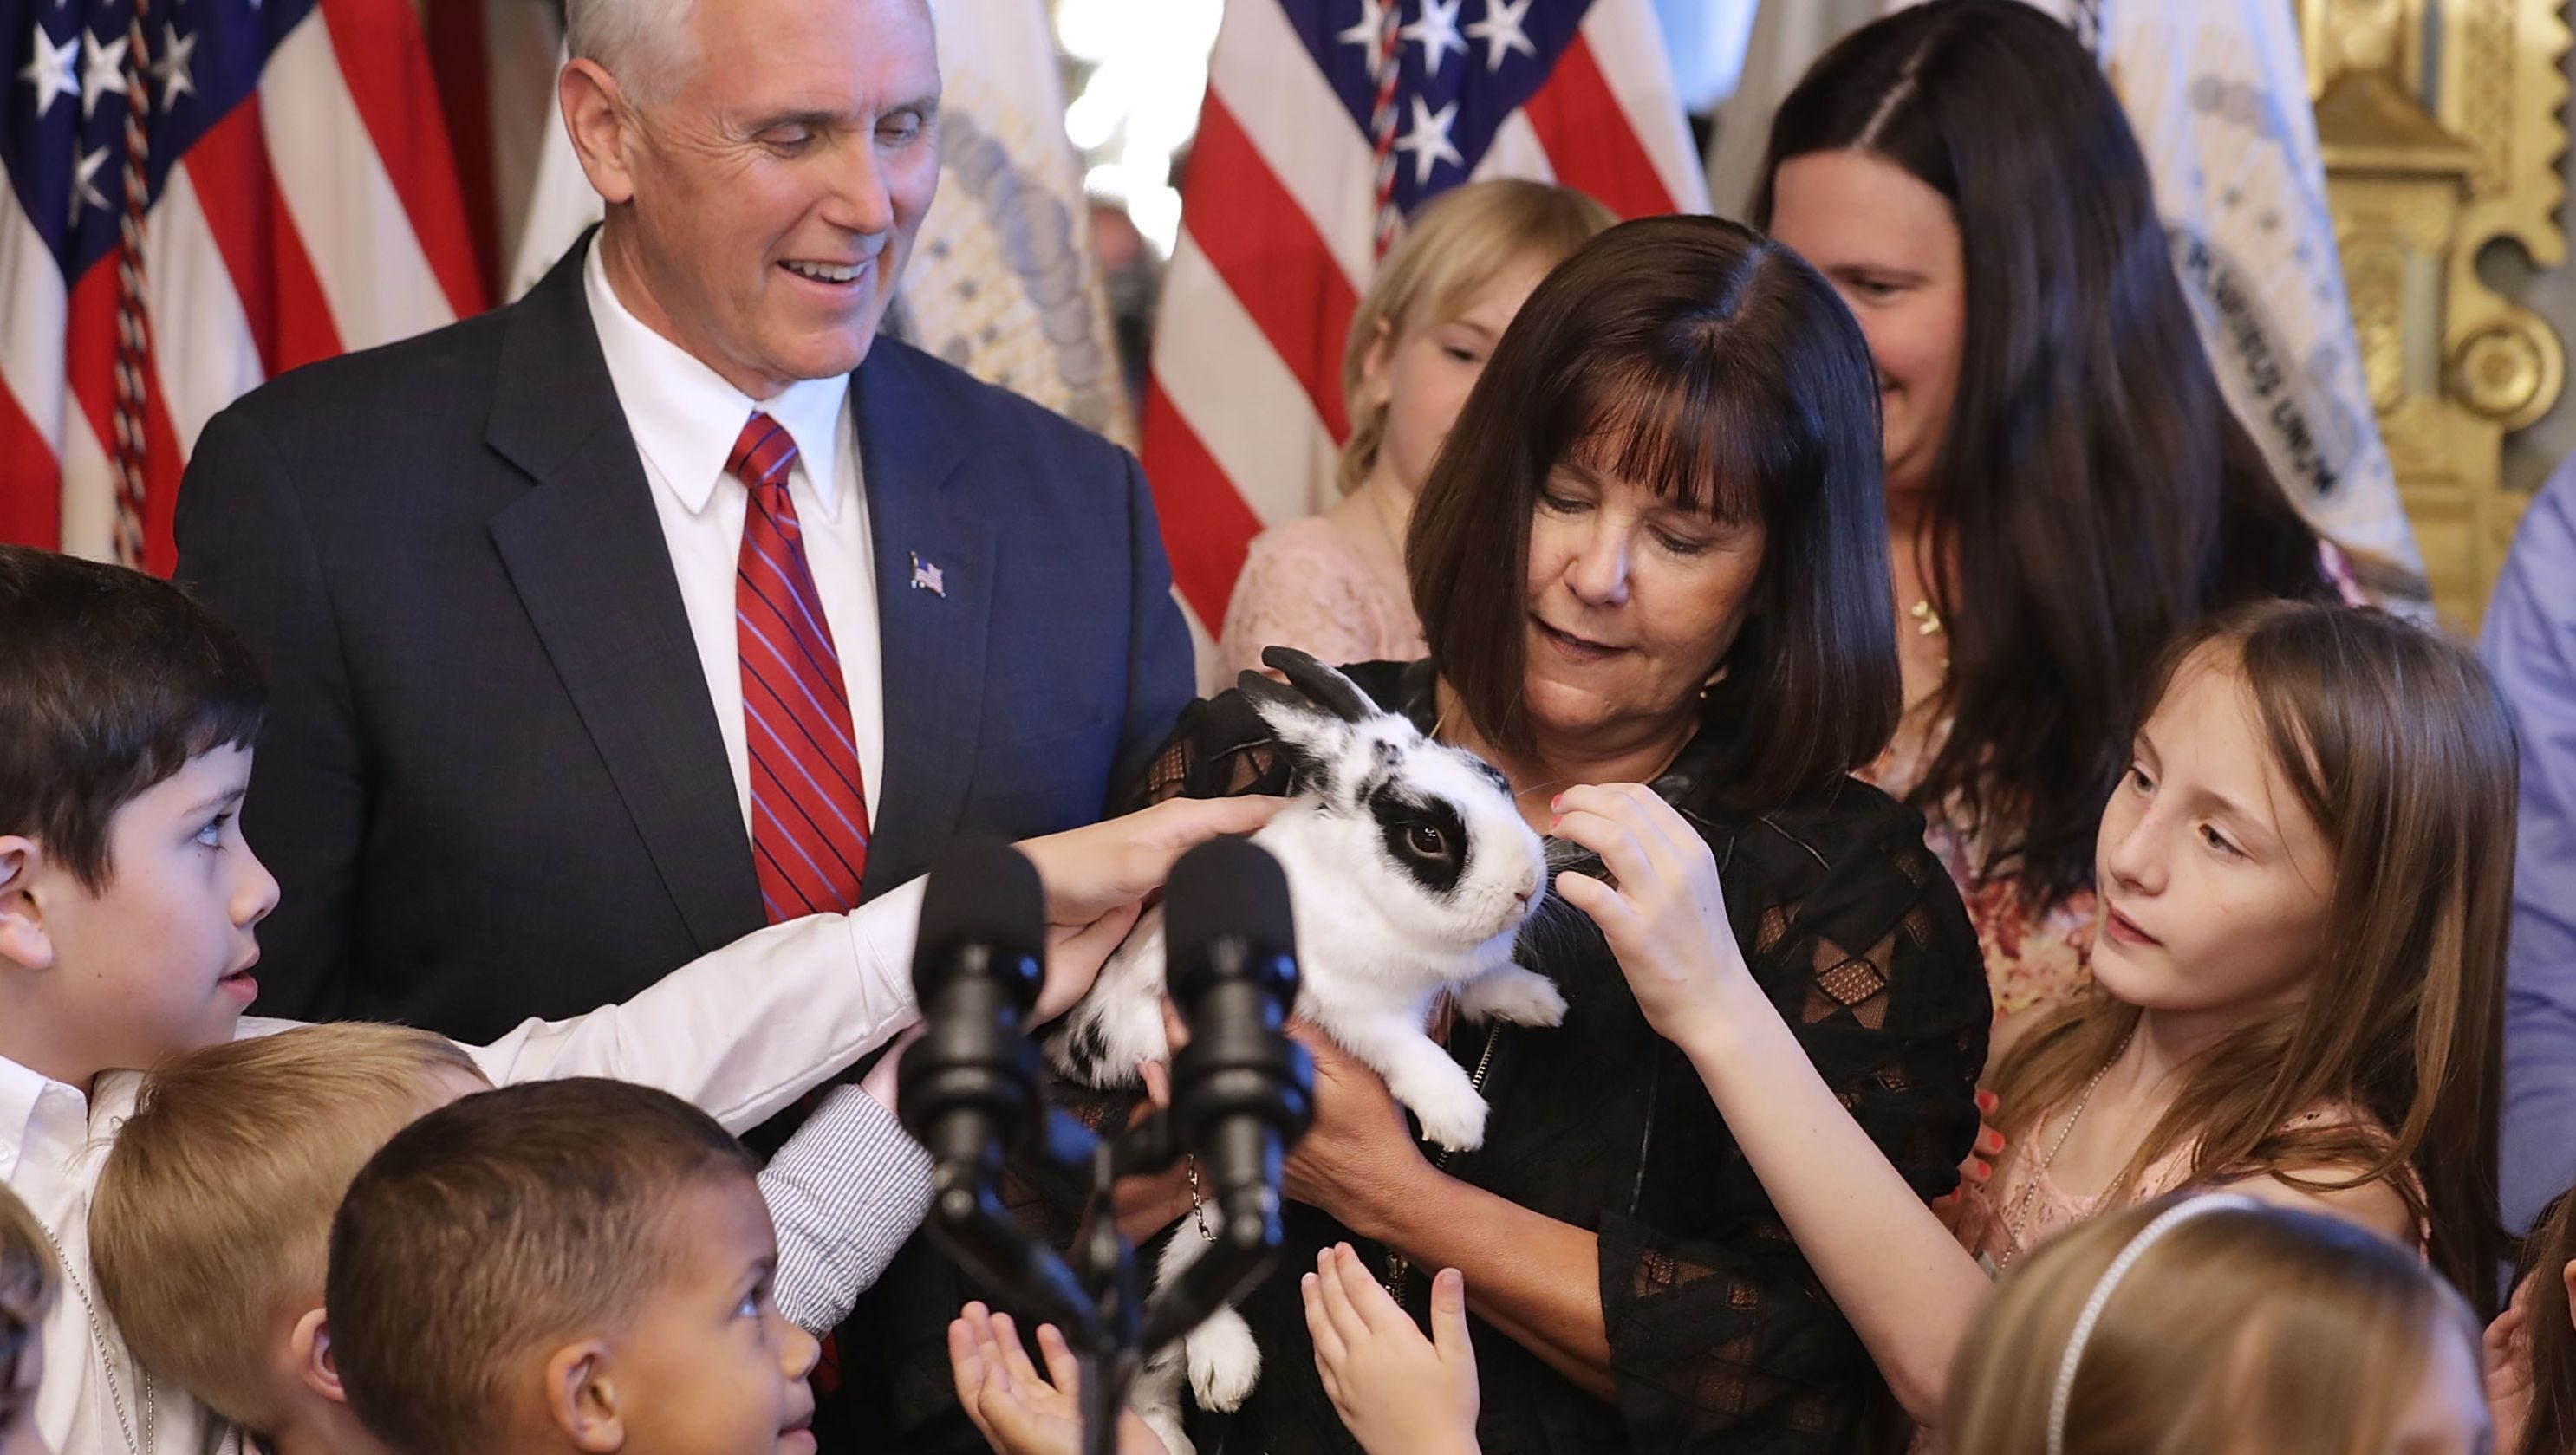 Mike Pence S Daughter Charlotte Bought Marlon Bundo Book With Gay Bunny